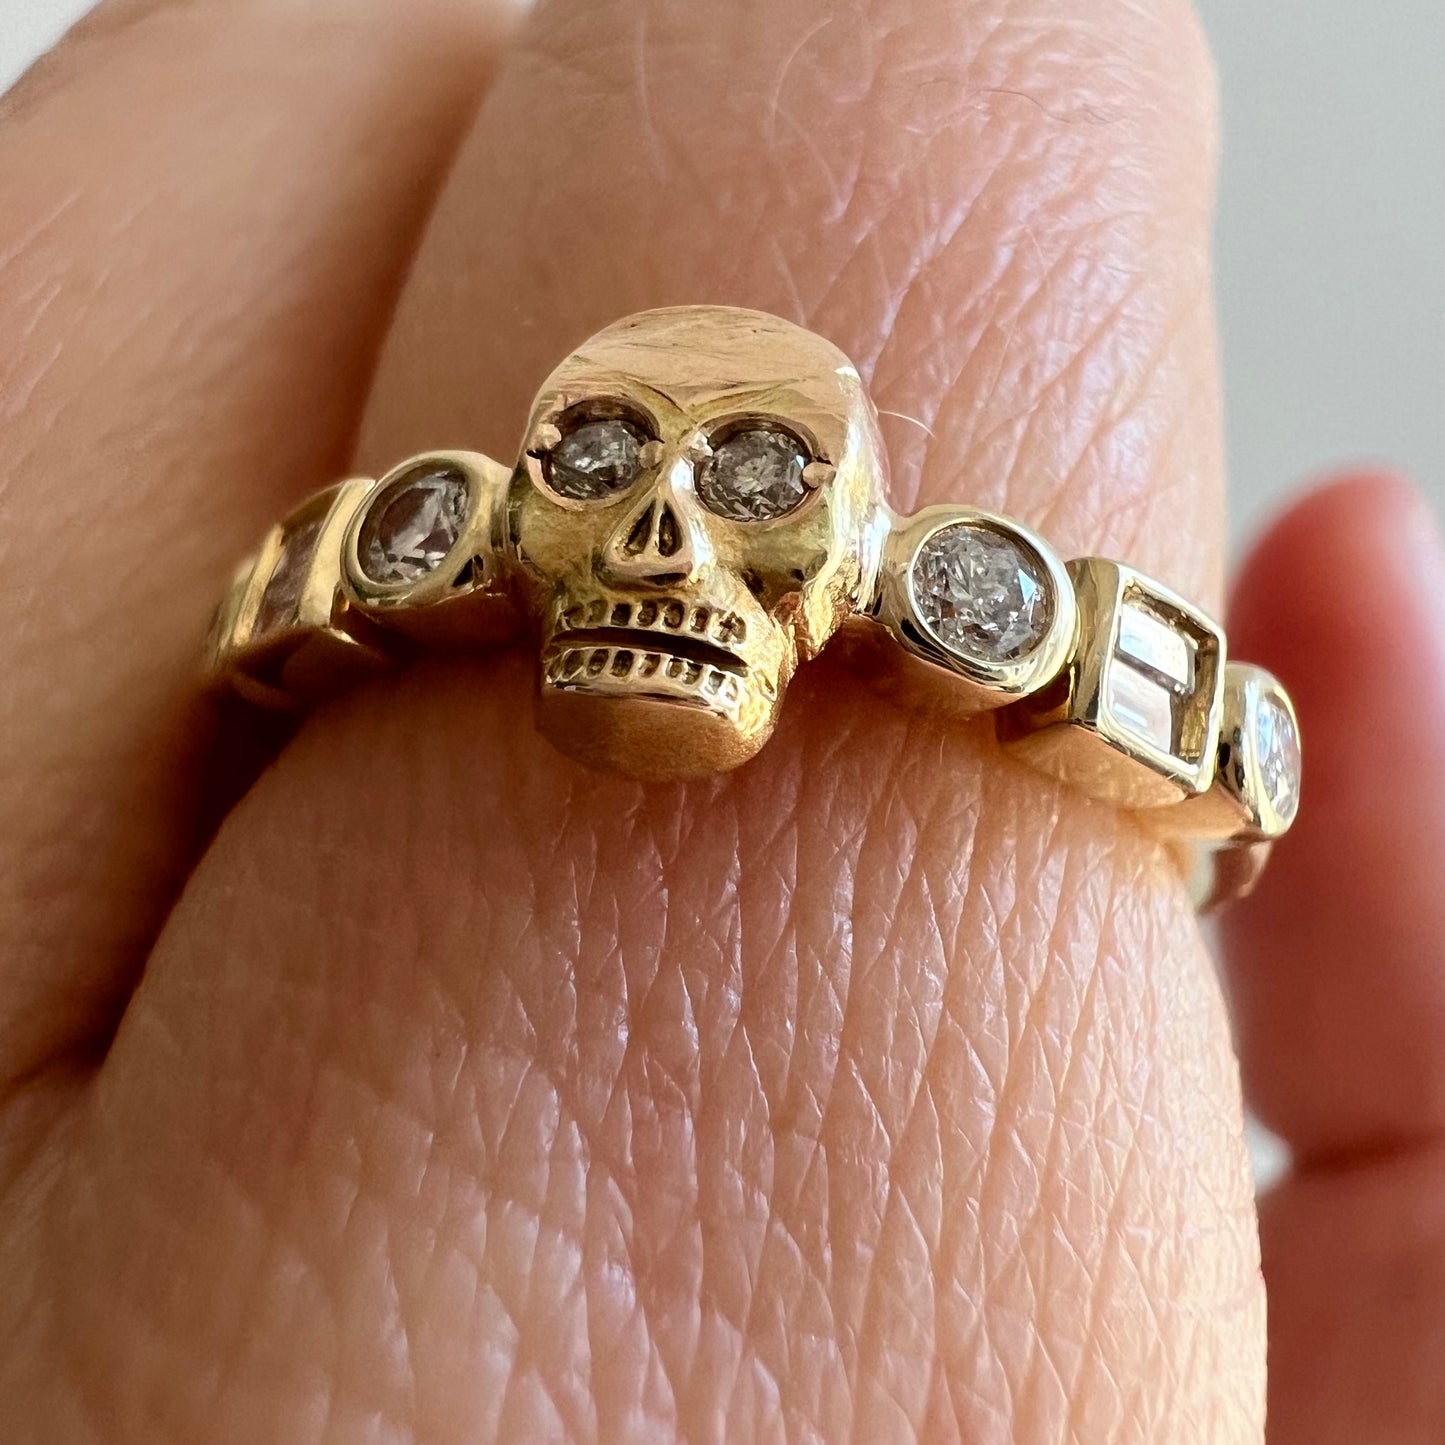 reimagined V I N T A G E // sparkle spooky / solid 14k yellow gold and diamond fraternal skull pin conversion ring / size 5.5